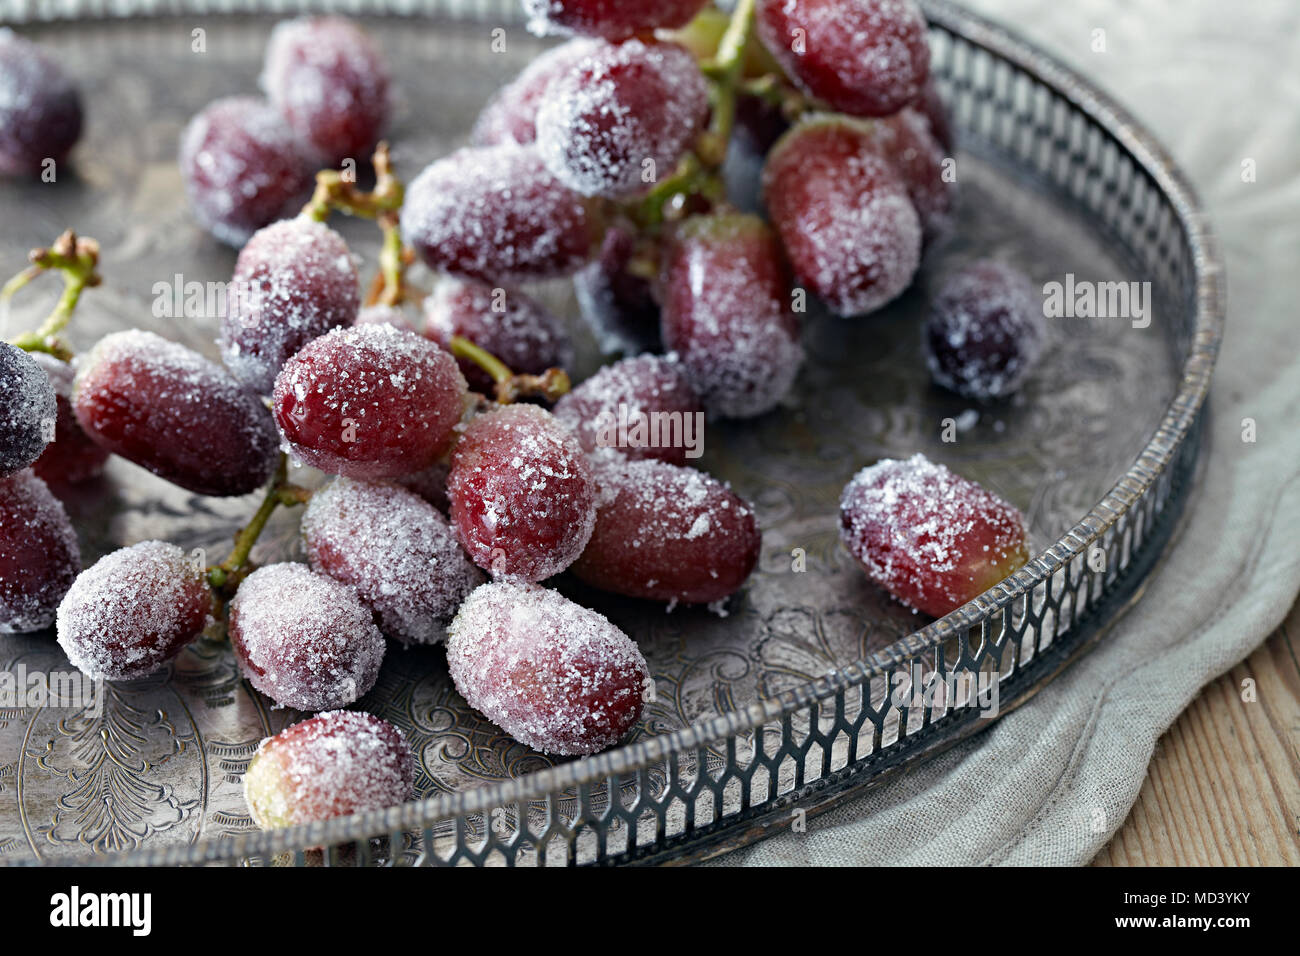 Sugar frosted black grapes on tray Stock Photo